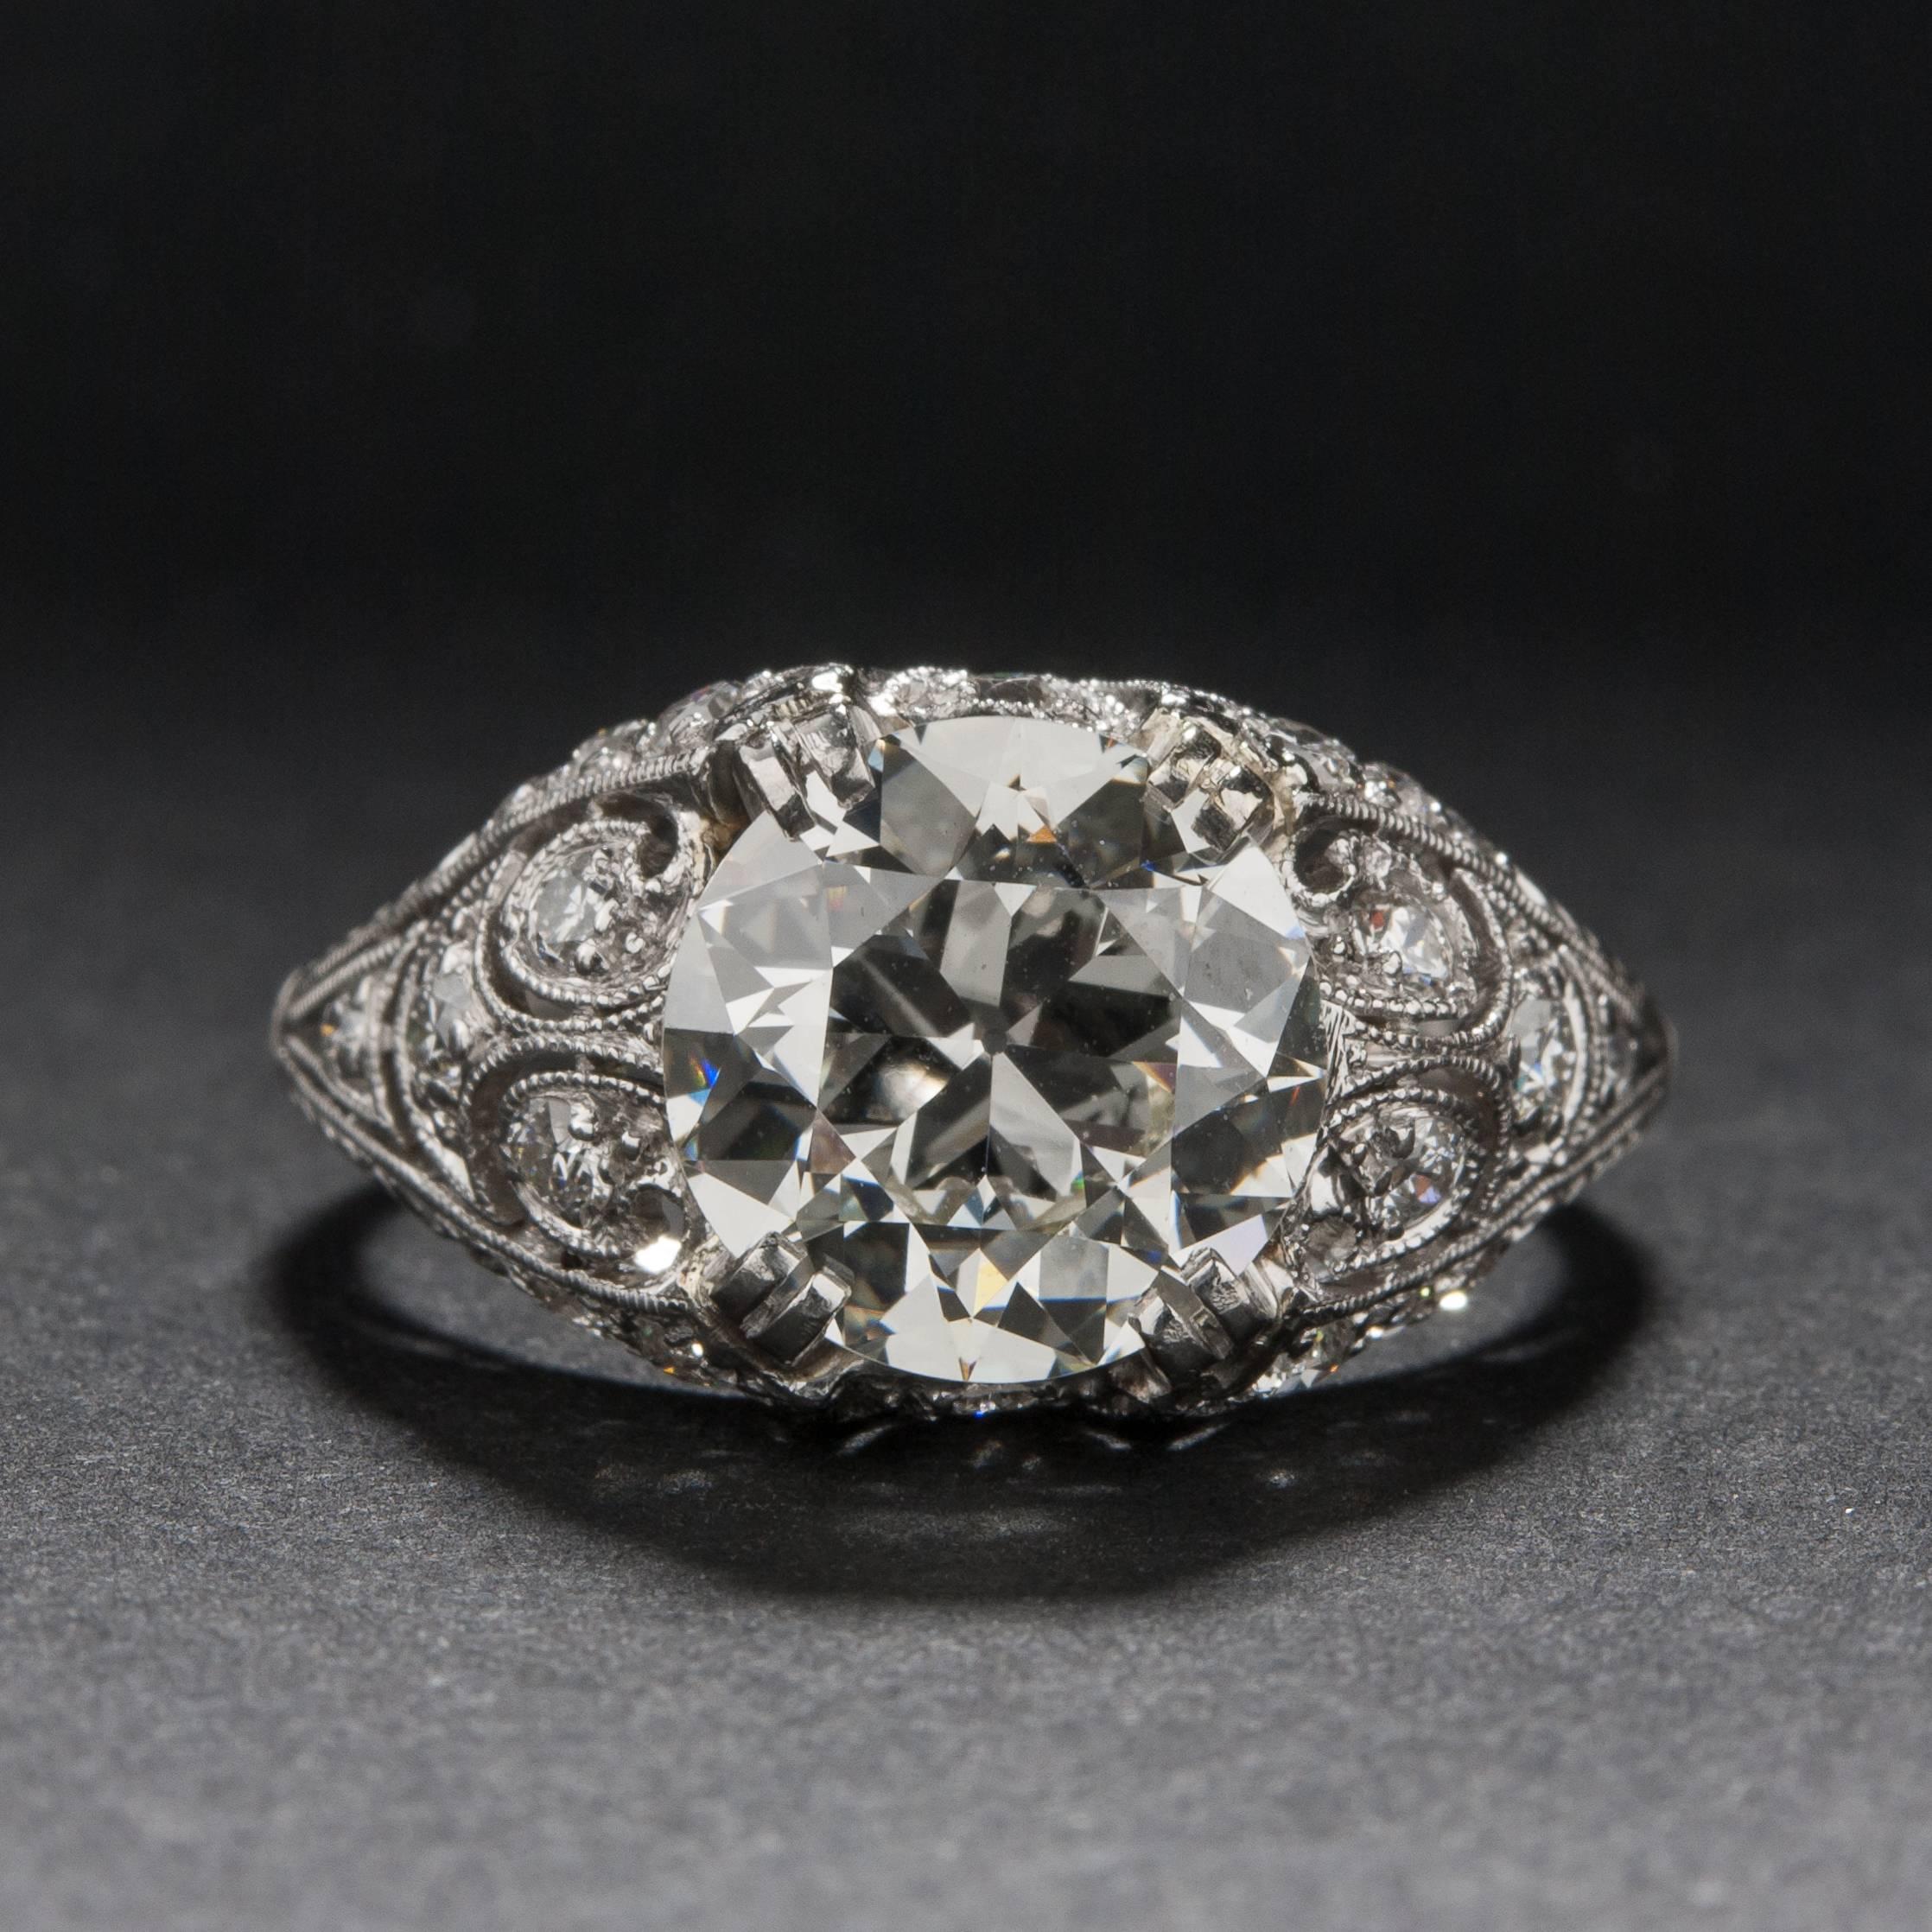 A stunning Edwardian era ring, hand crafted circa 1910. This beautiful piece features a 2.42 carat center diamond (Estimated I color, VS1 clarity) and .40 total carats of side diamonds. The mounting is crafted in platinum and the ring is currently